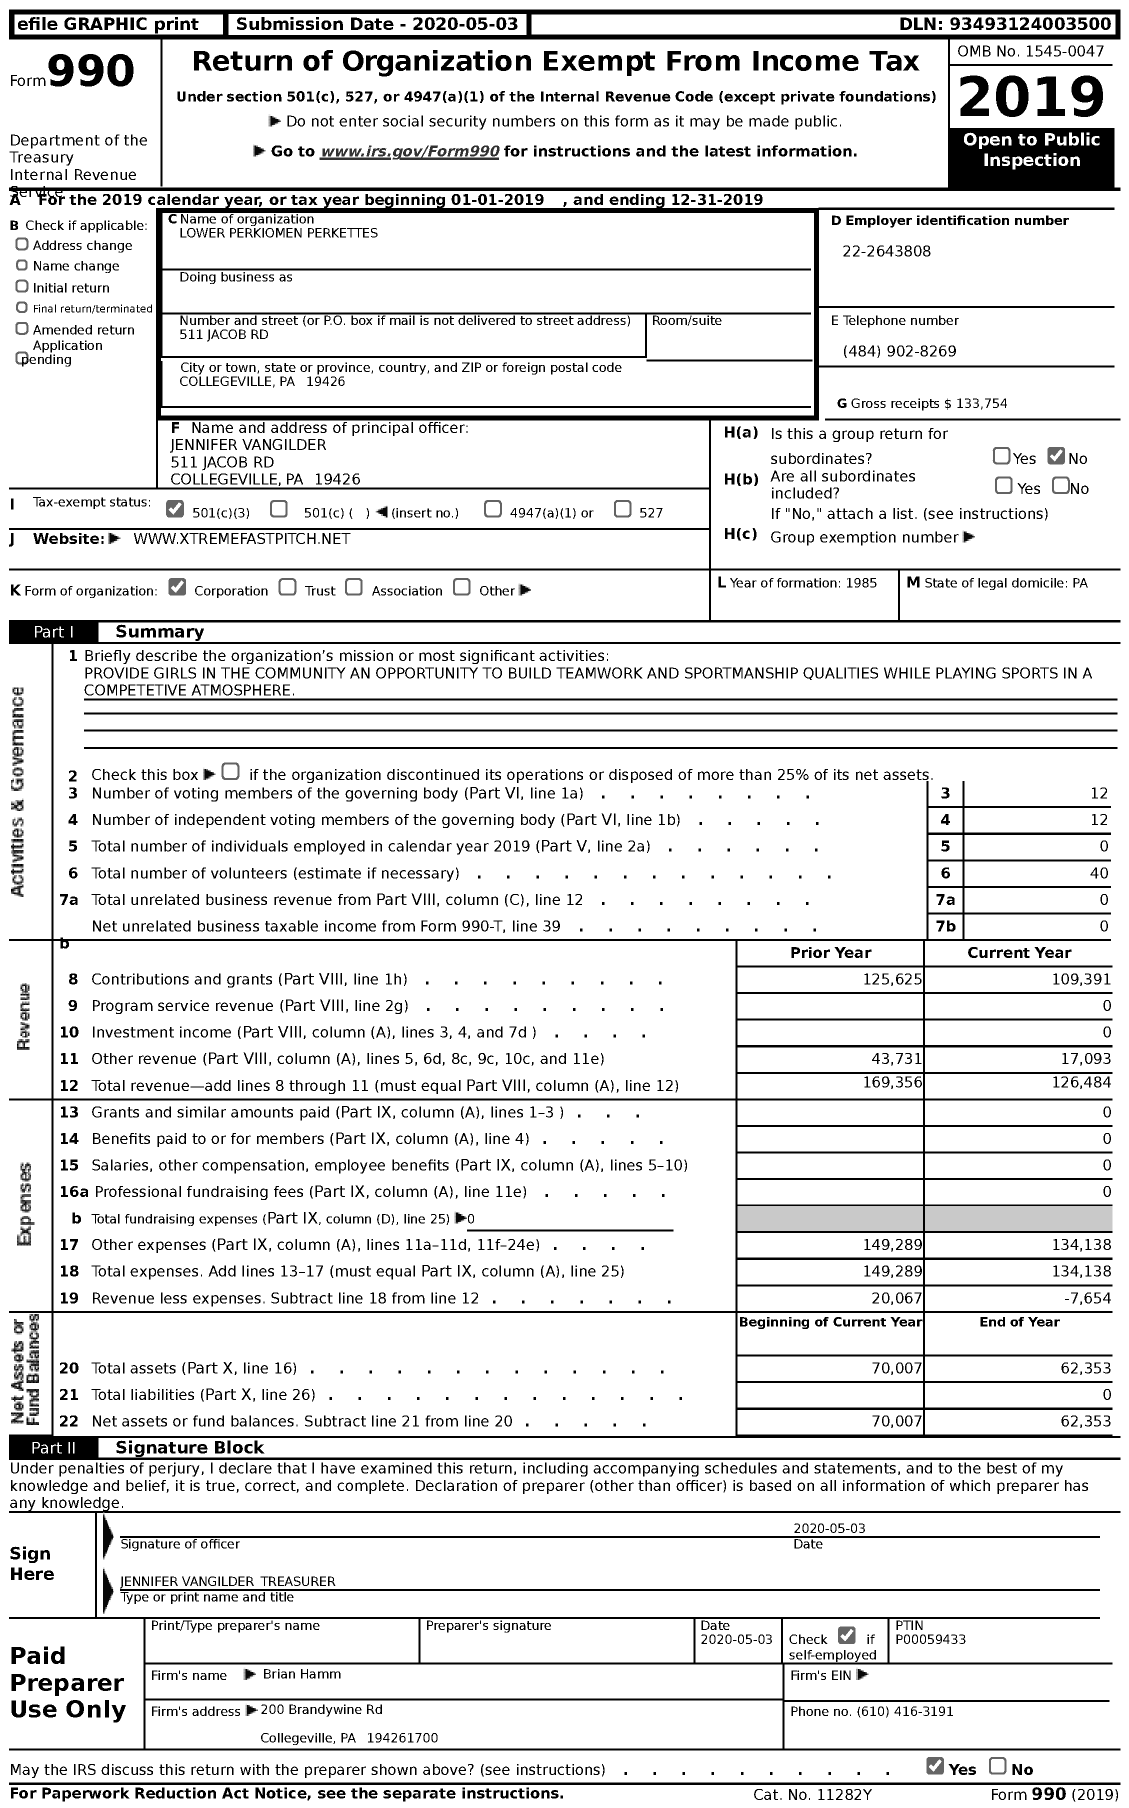 Image of first page of 2019 Form 990 for Lower Perkiomen Perkettes